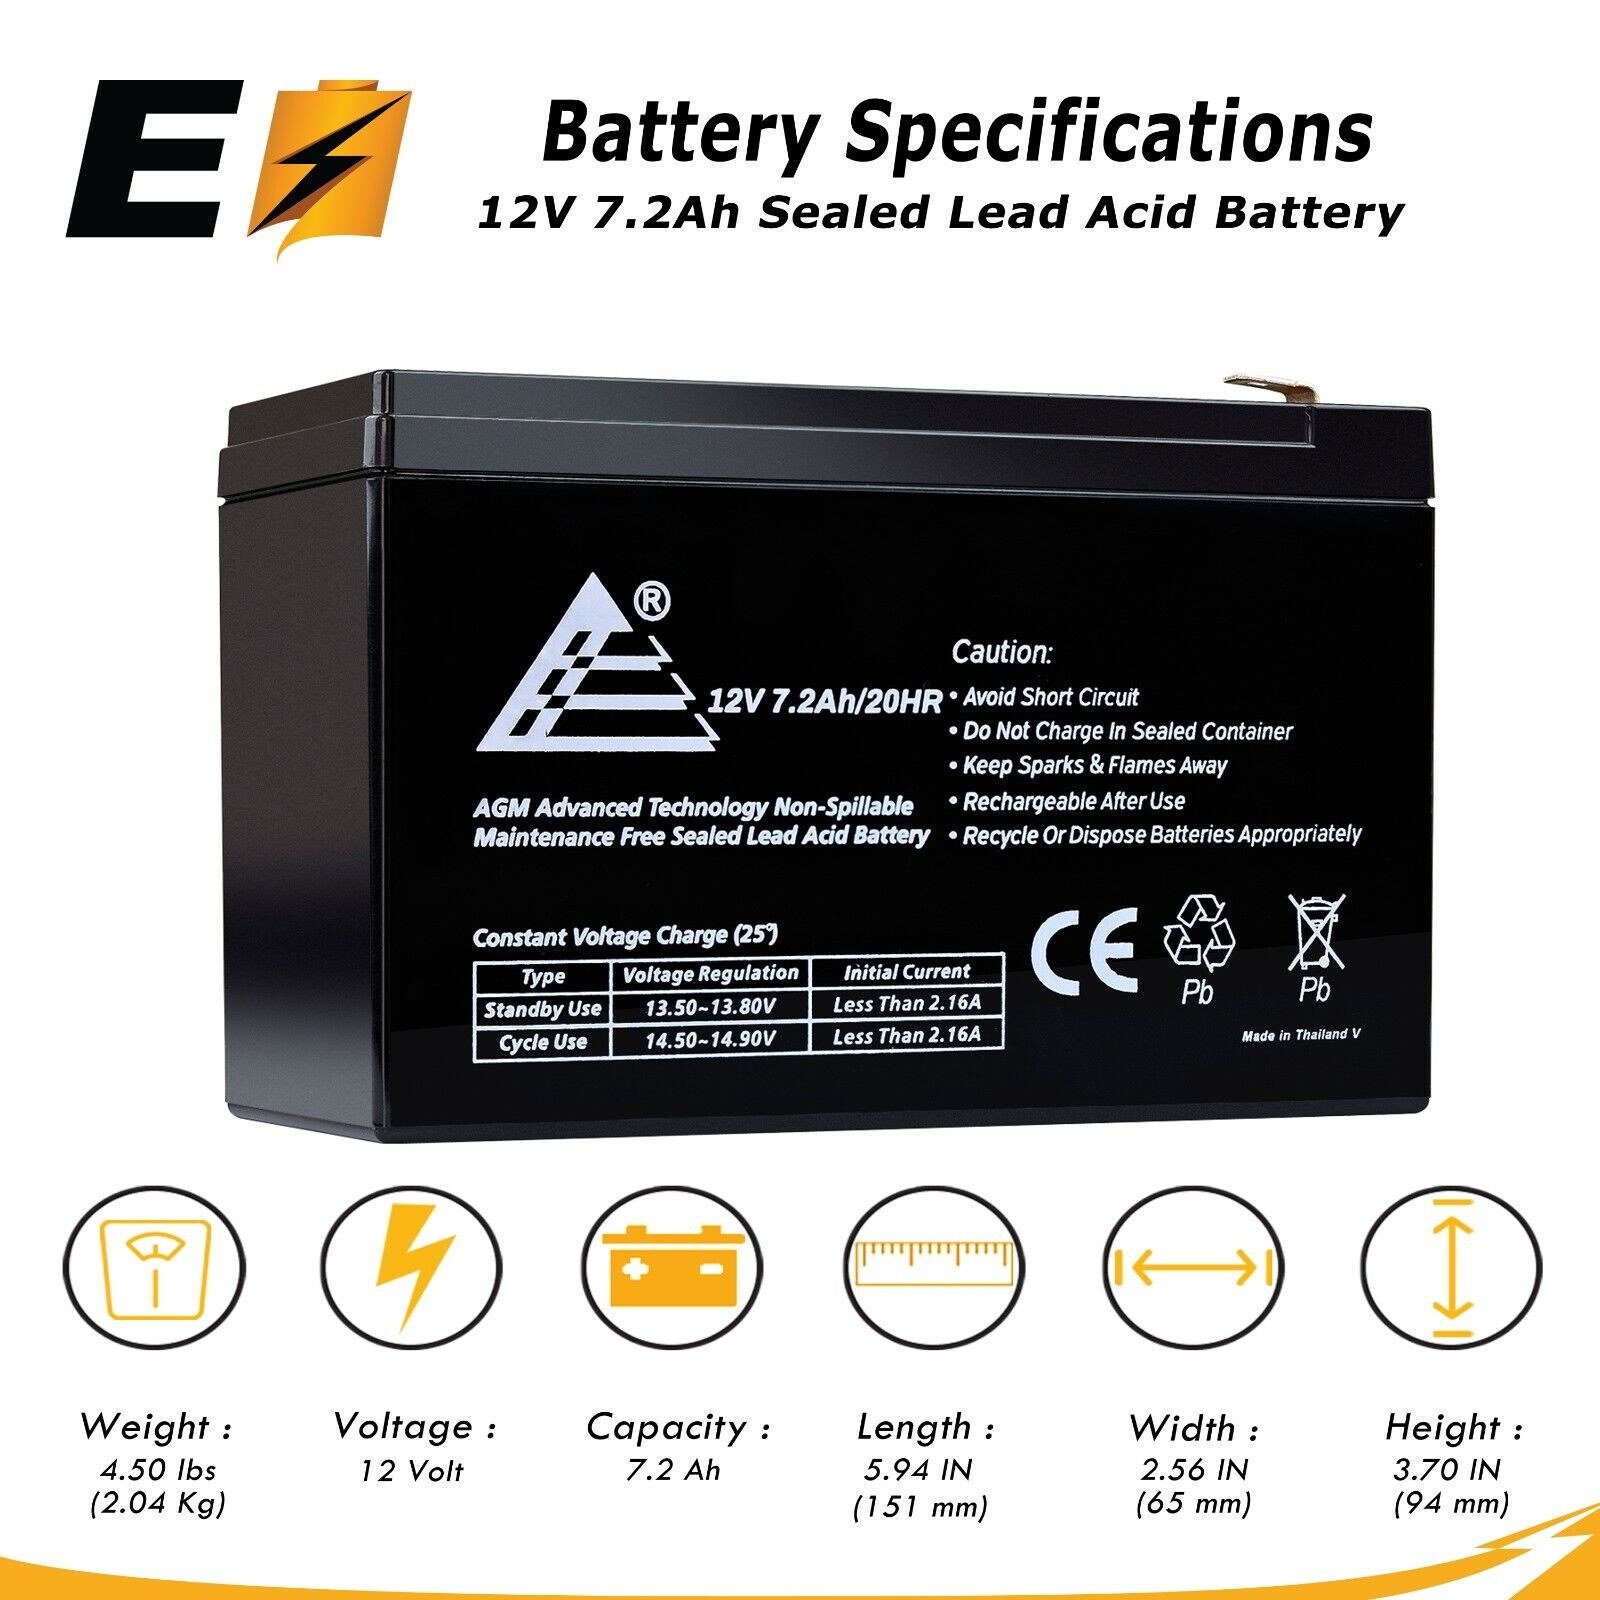 This is an AJC Brand Replacement APC BackUPS 400 12V 7Ah UPS Battery